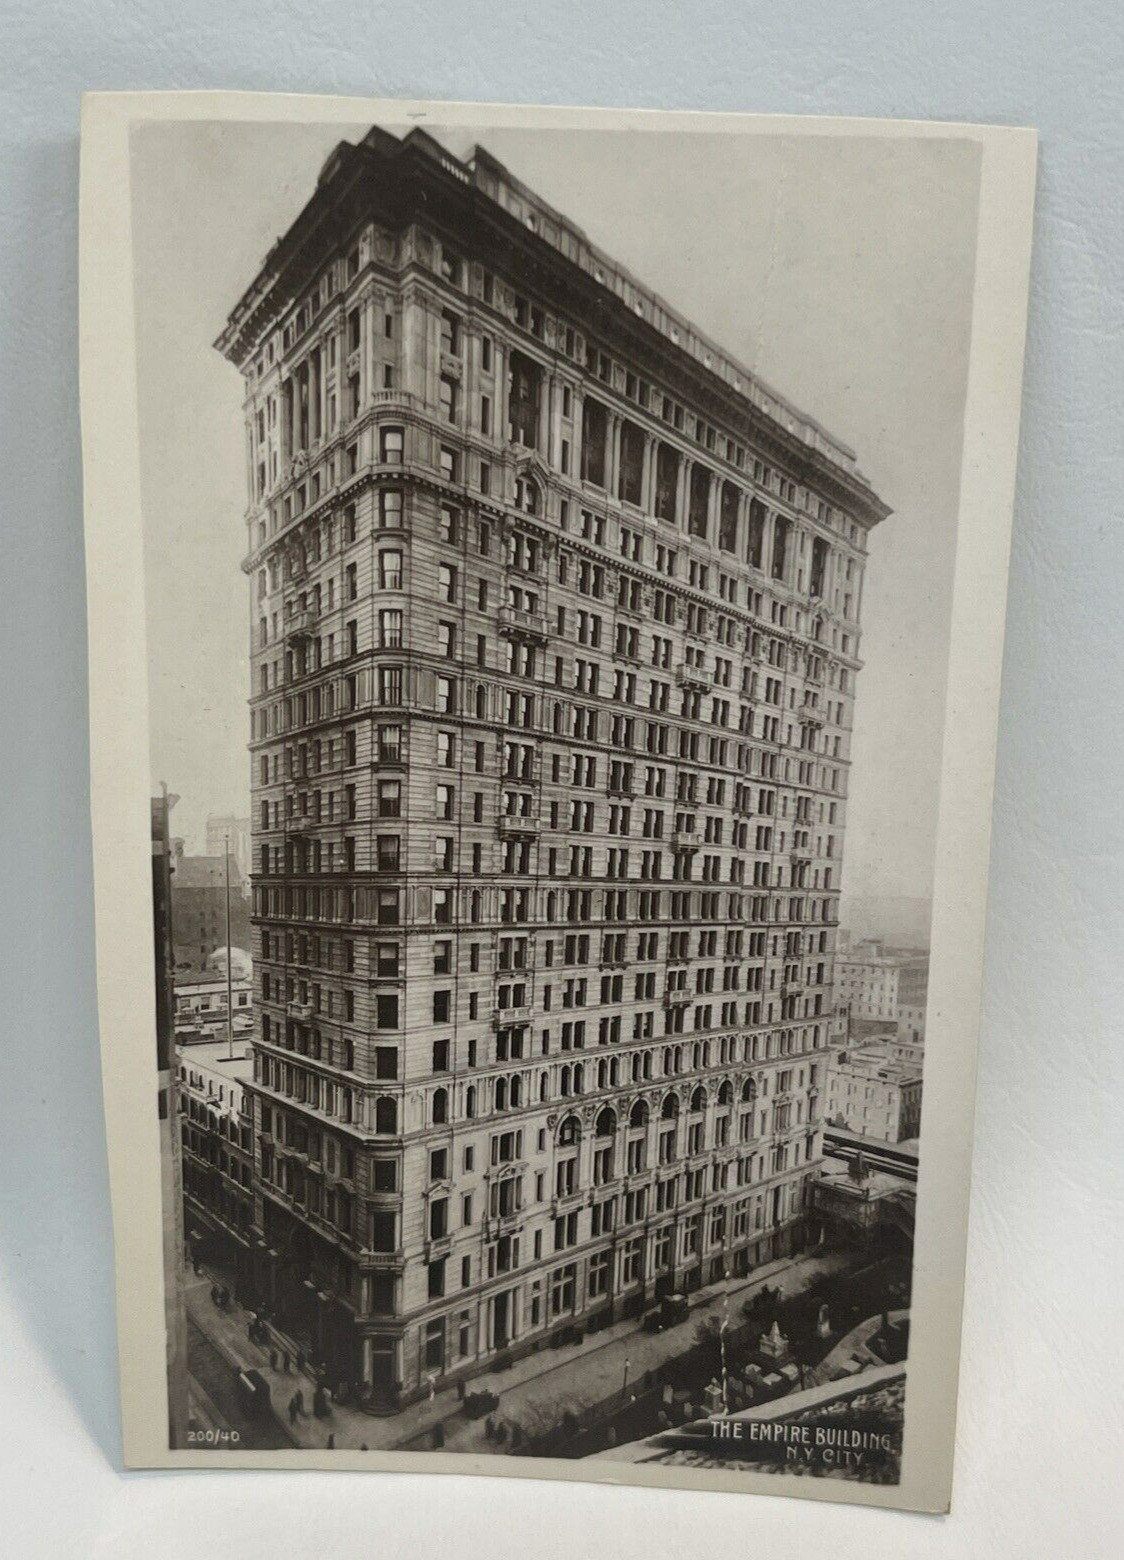 RPPC The Empire Building New York City NYC NY Early 1900s Bromide Paper